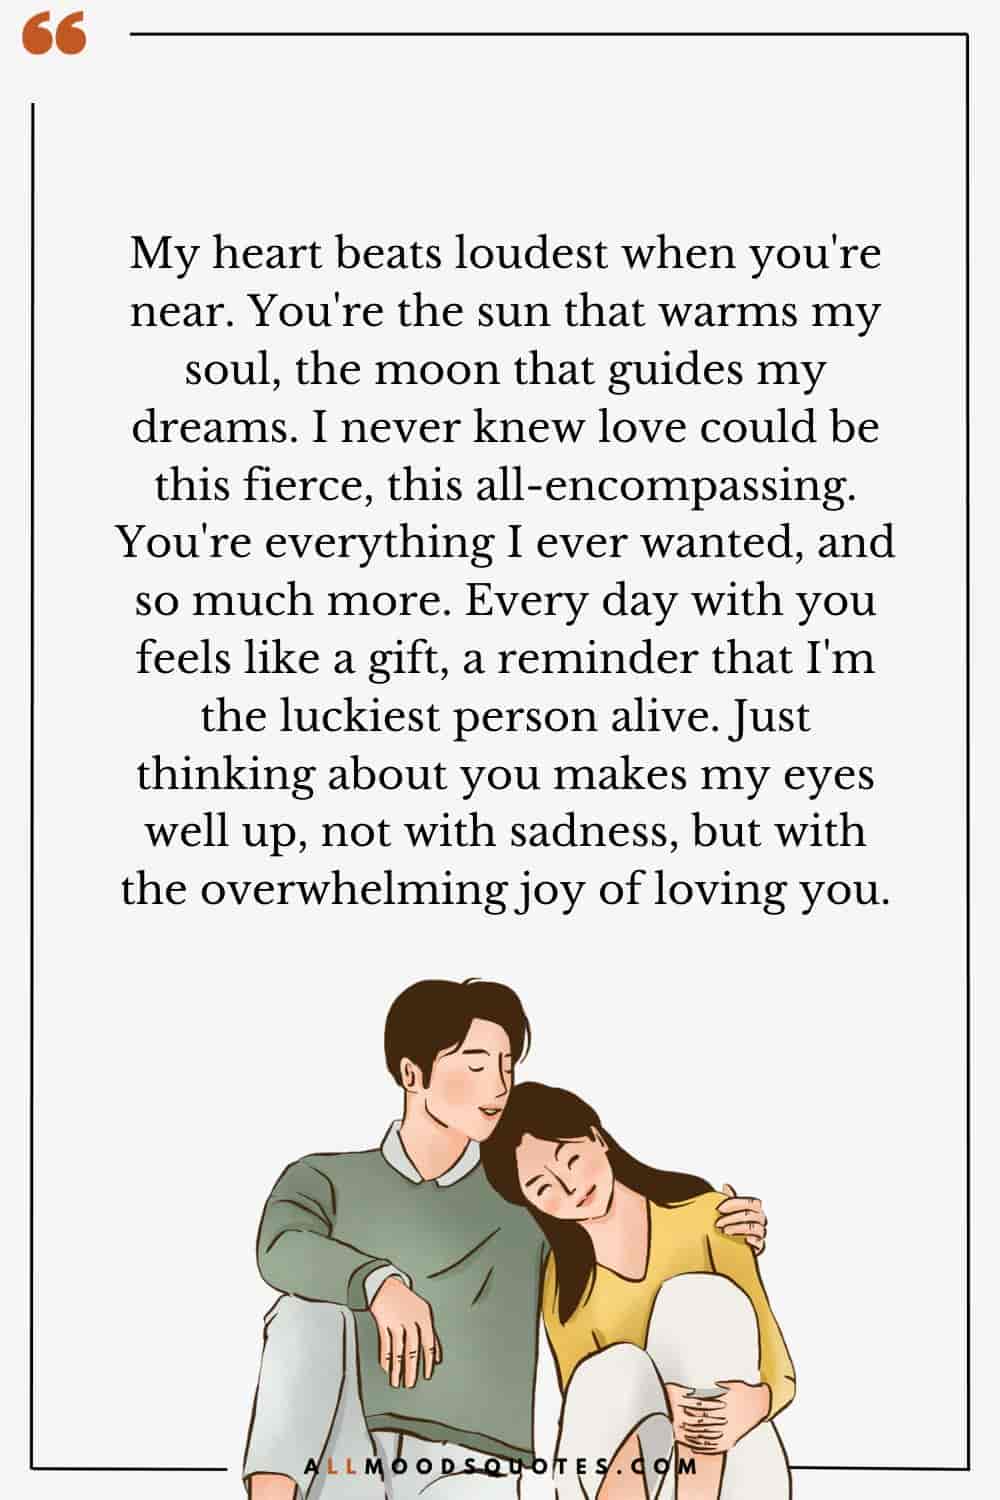 Romantic Love Messages For Your Love To Make Her Cry